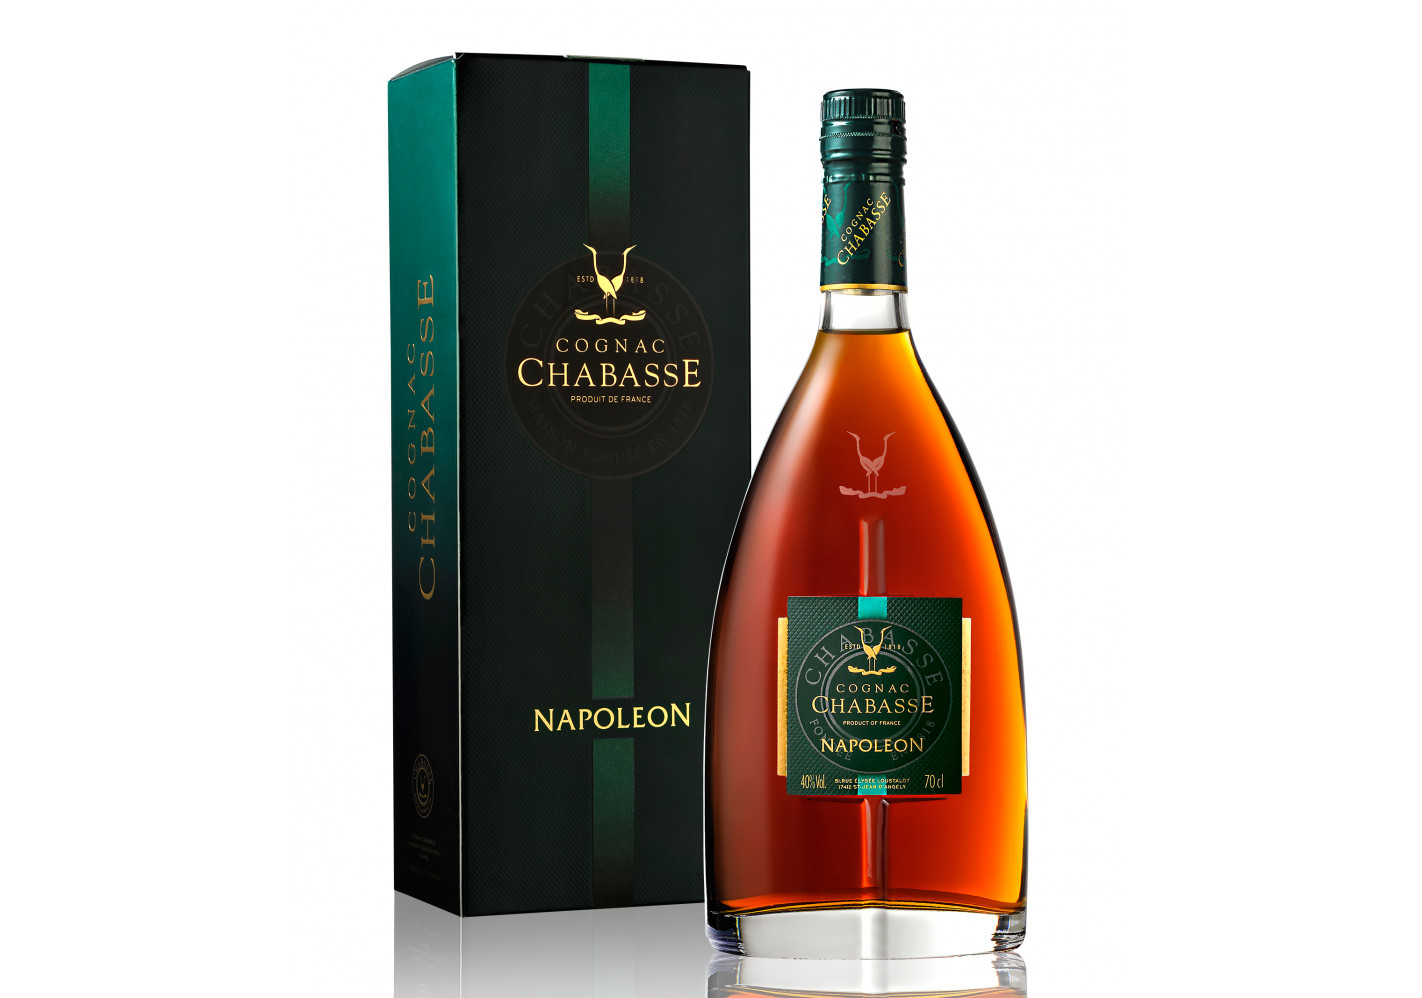 Chabasse Napoleon Cognac Buy Online And Find Prices On Cognac Expert Com